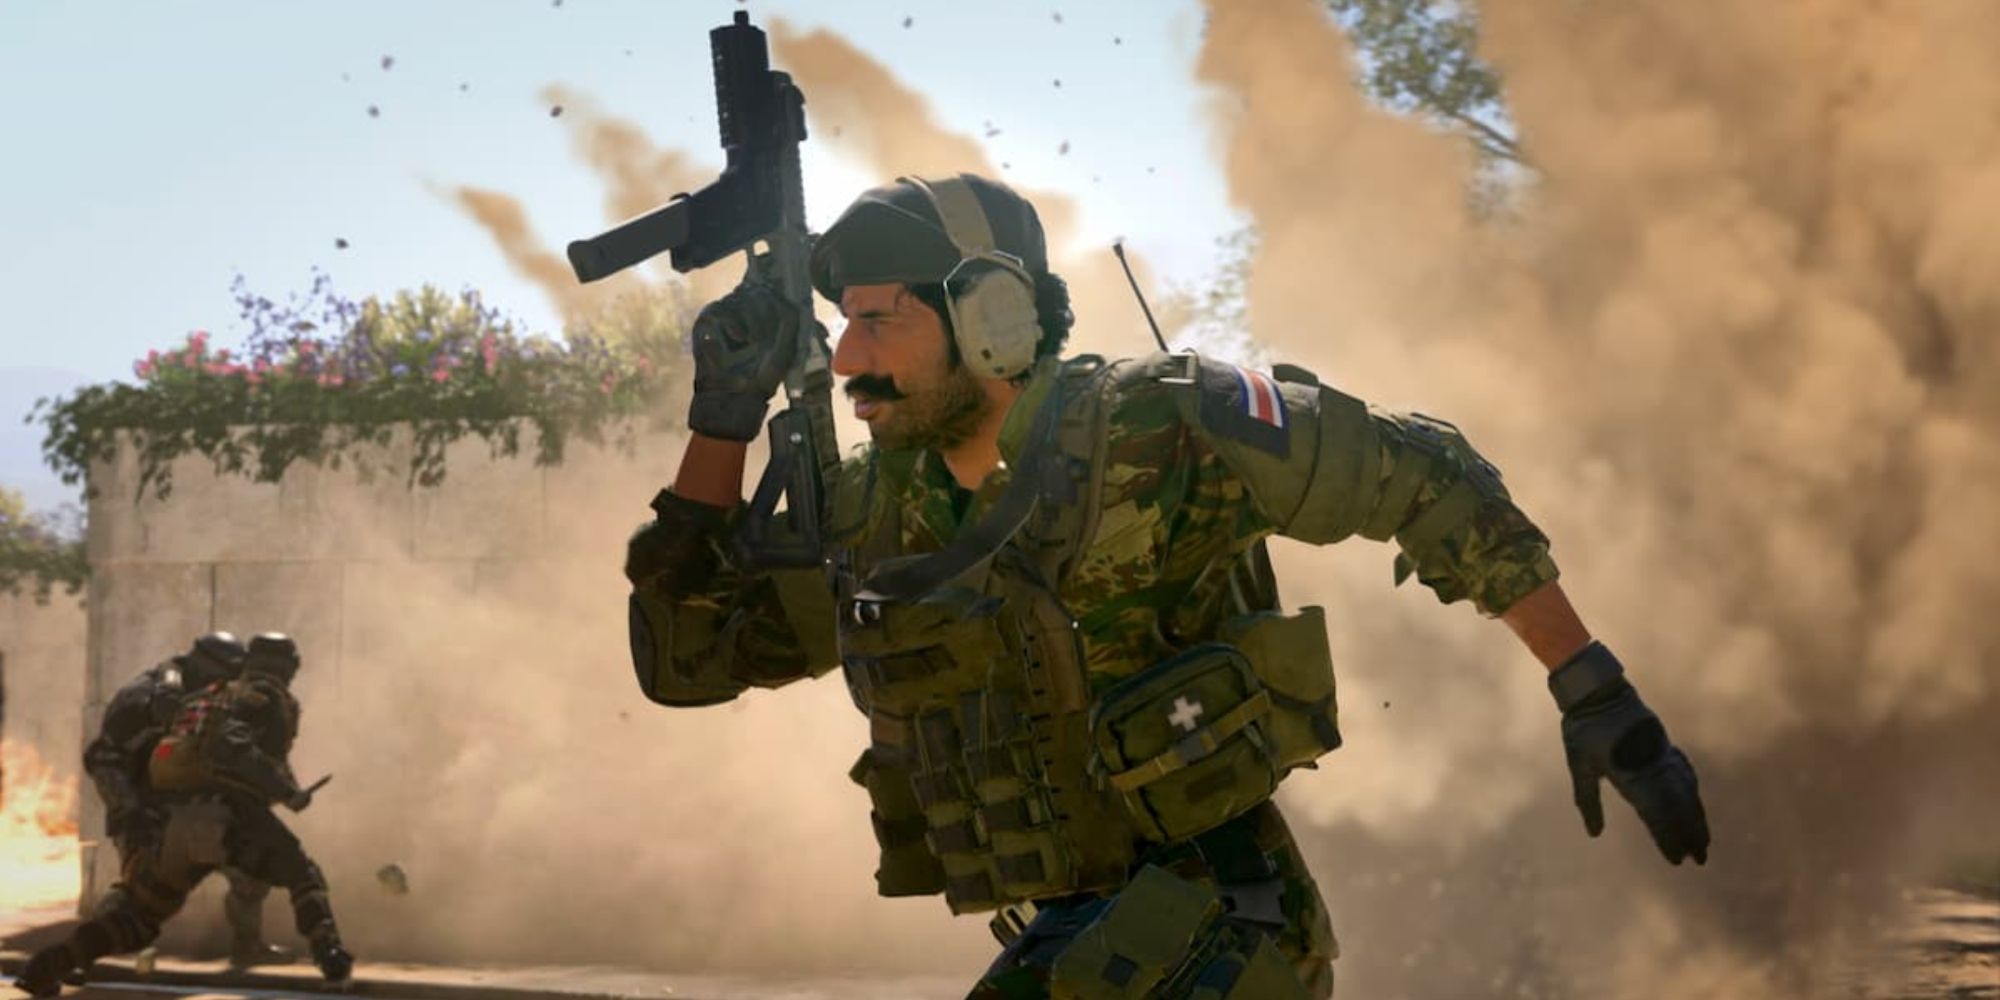 Promotional image of multiplayer gameplay in Call of Duty: Modern Warfare 2